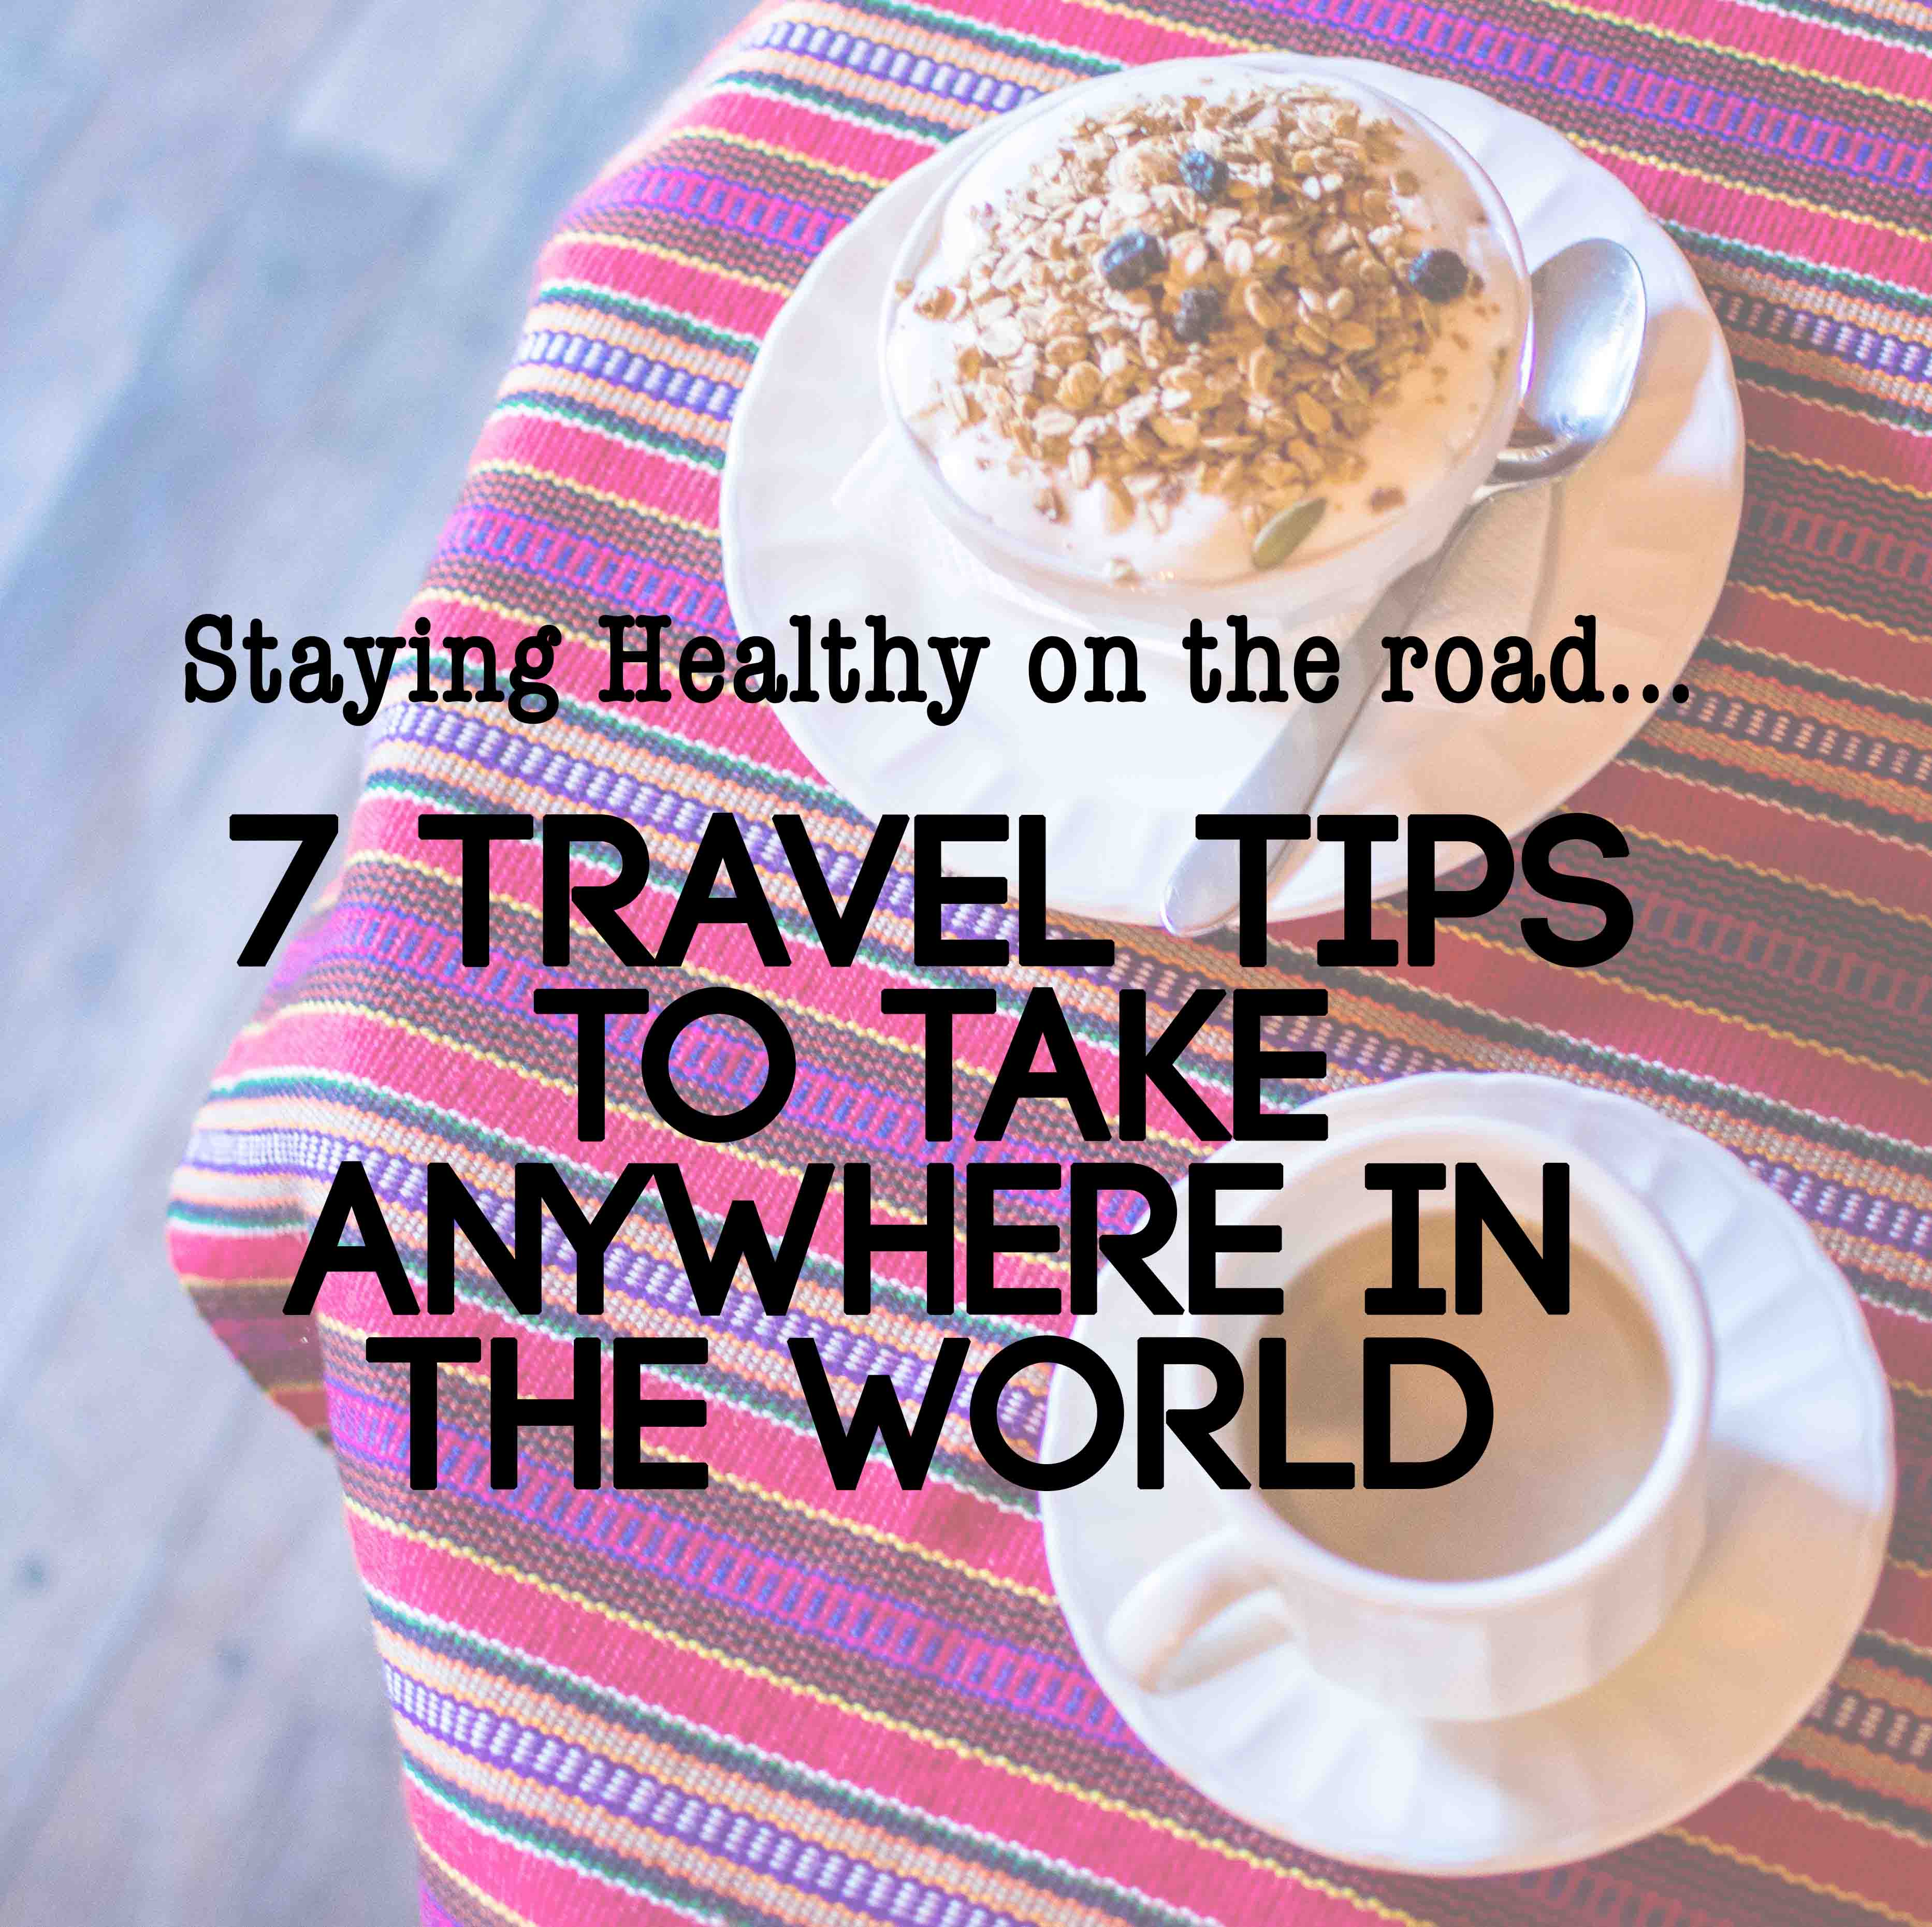 Travel tips to stay healthy anywhere in the world Lauren Rudick